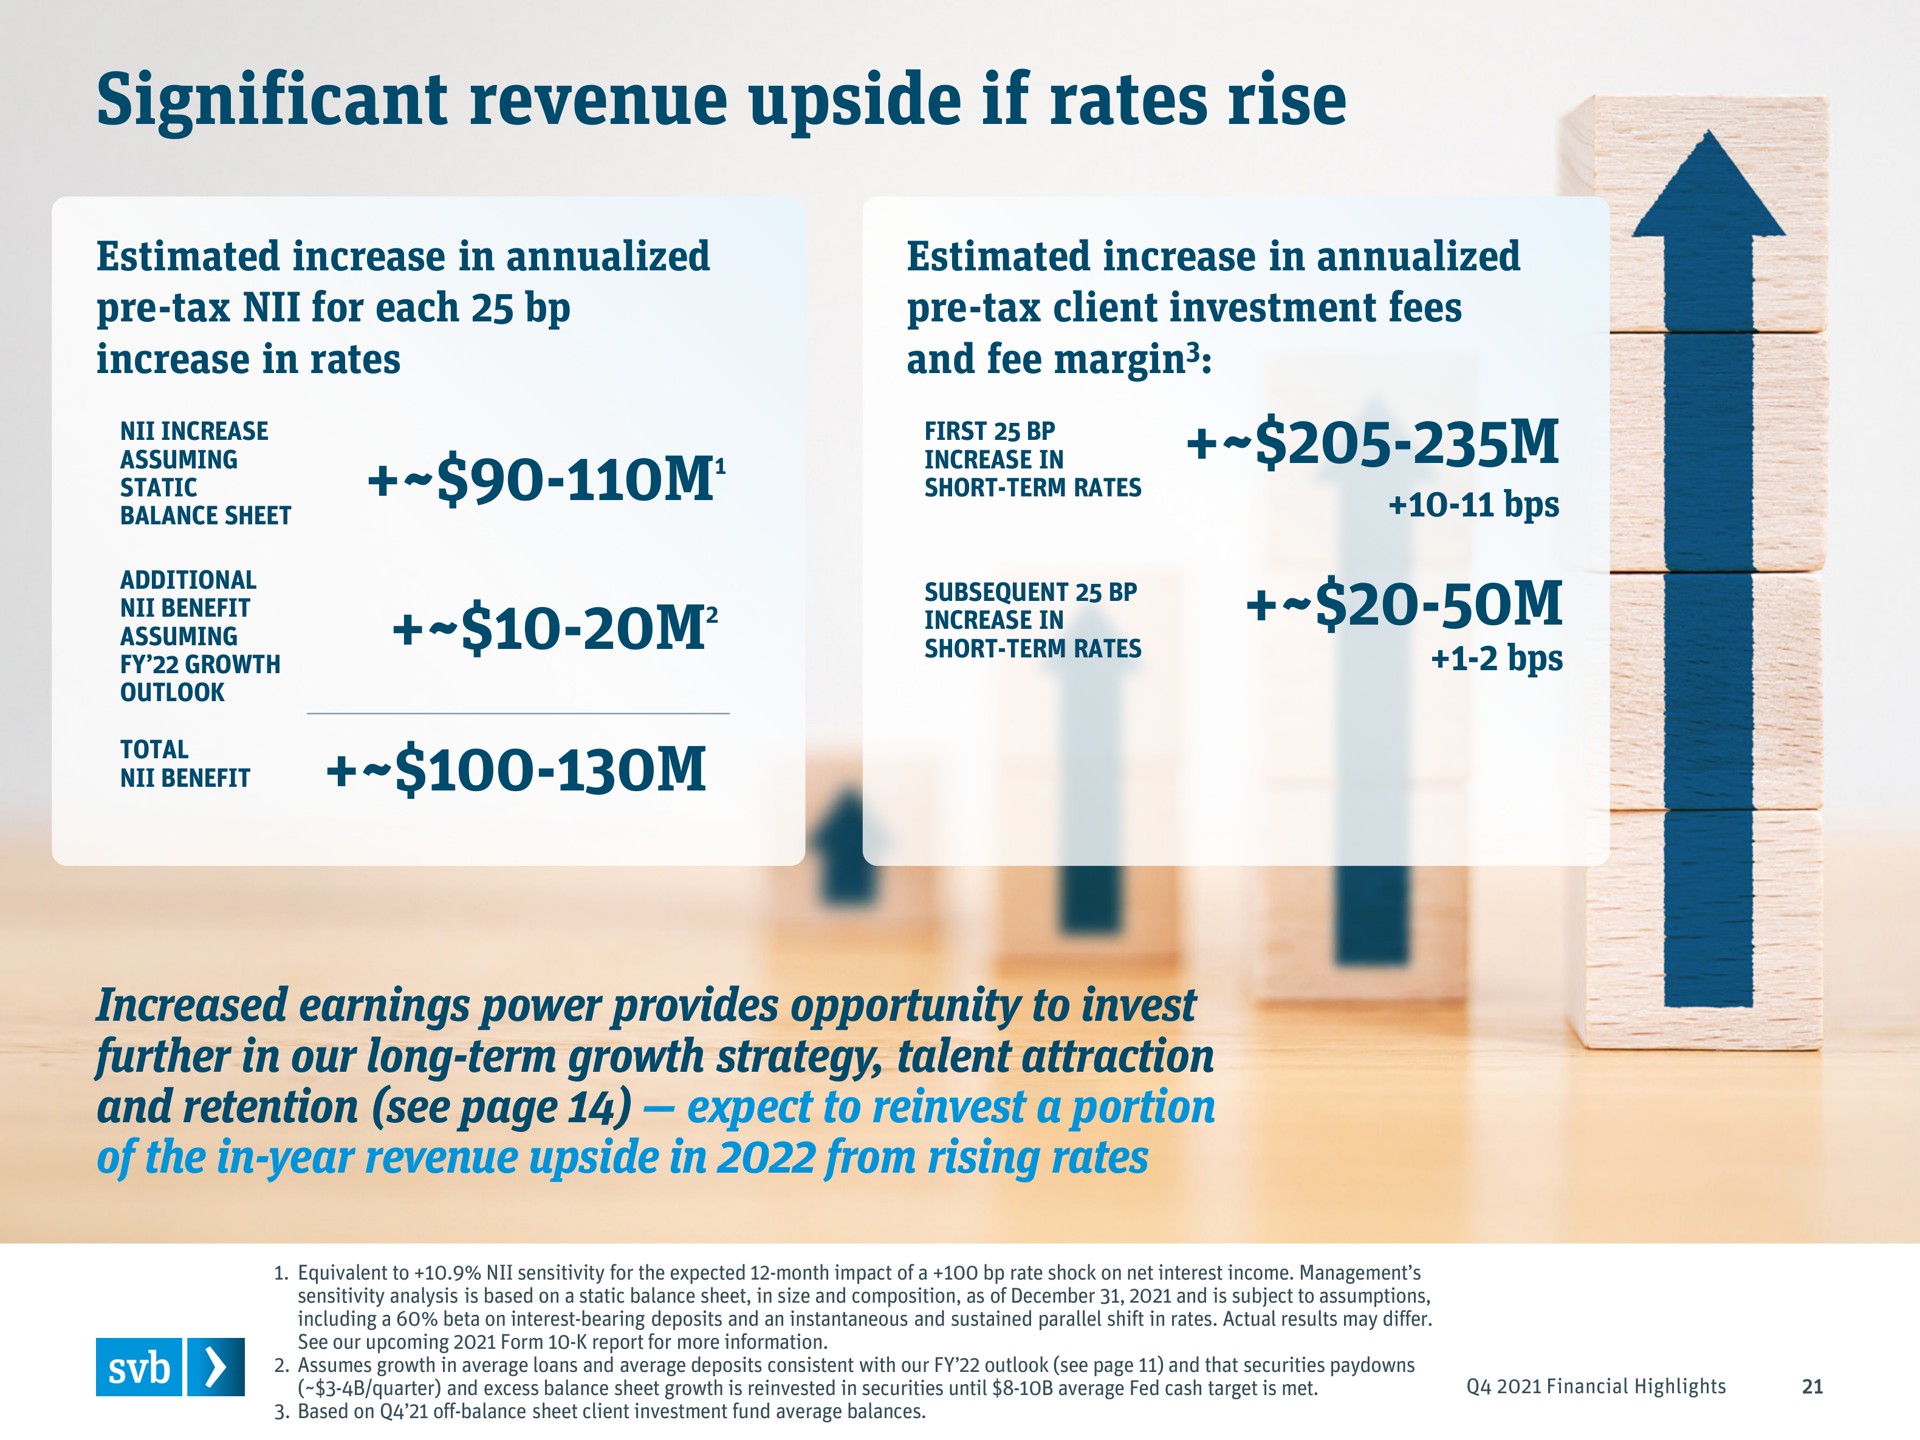 significant revenue upside if rates rise increased earnings power provides opportunity to invest further in our long term growth strategy talent attraction and retention see page expect to reinvest a portion of the in year revenue upside in from rising rates static assuming news | Silicon Valley Bank